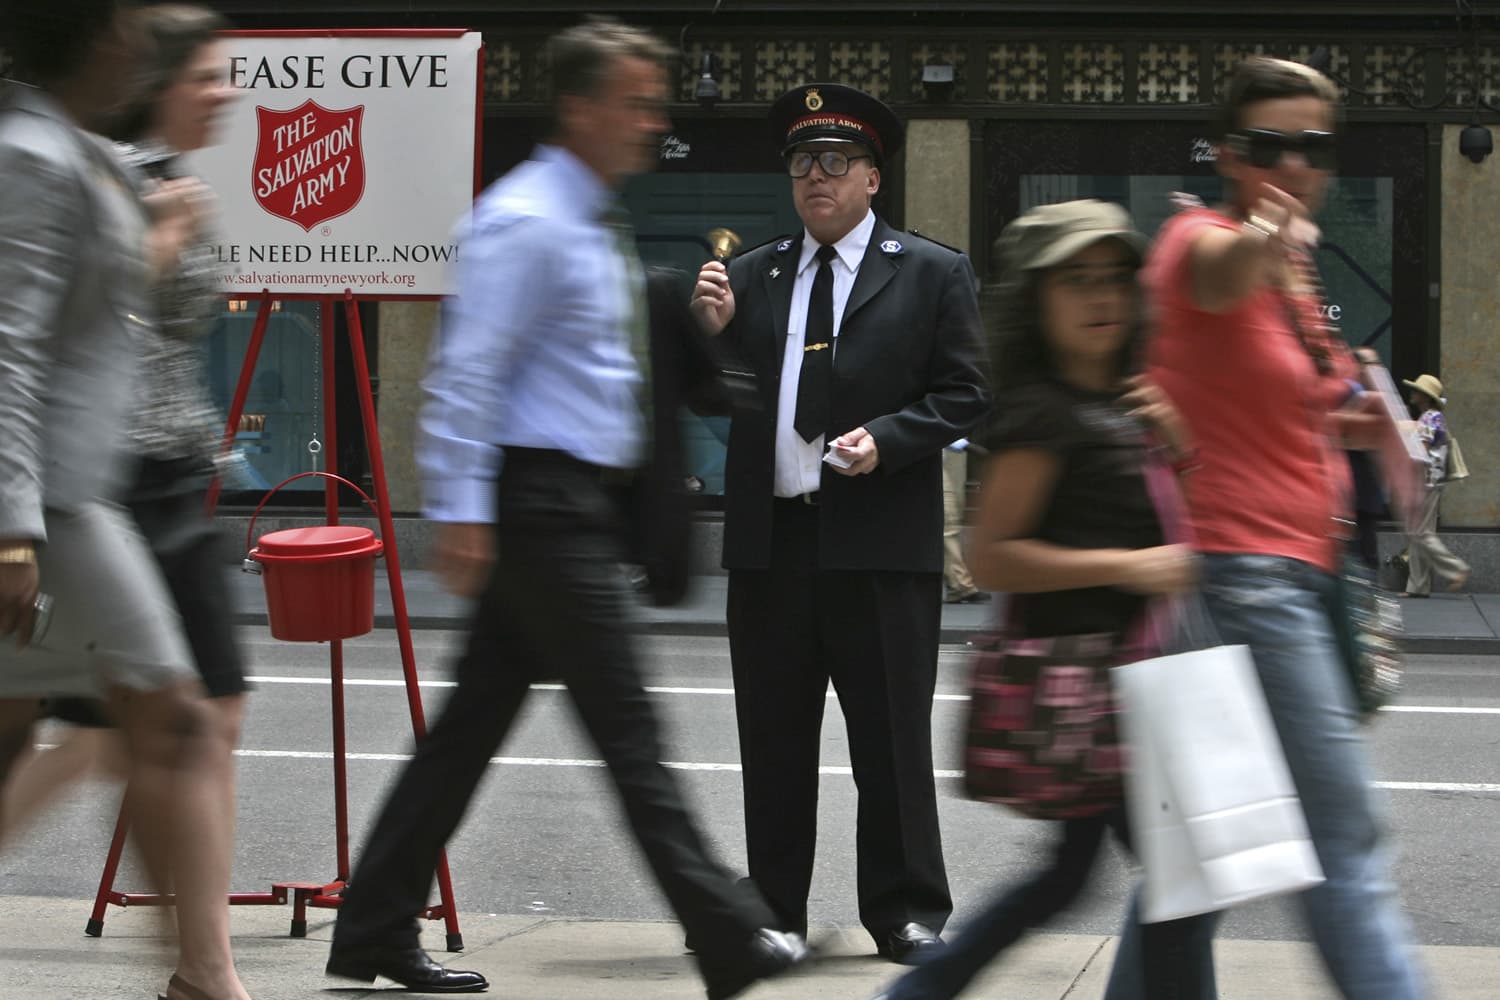 Salvation Army Soldier Daniel Aherns collects donations on 5th Ave. at Rockefeller Center, Monday, July 13, 2009 in New York.